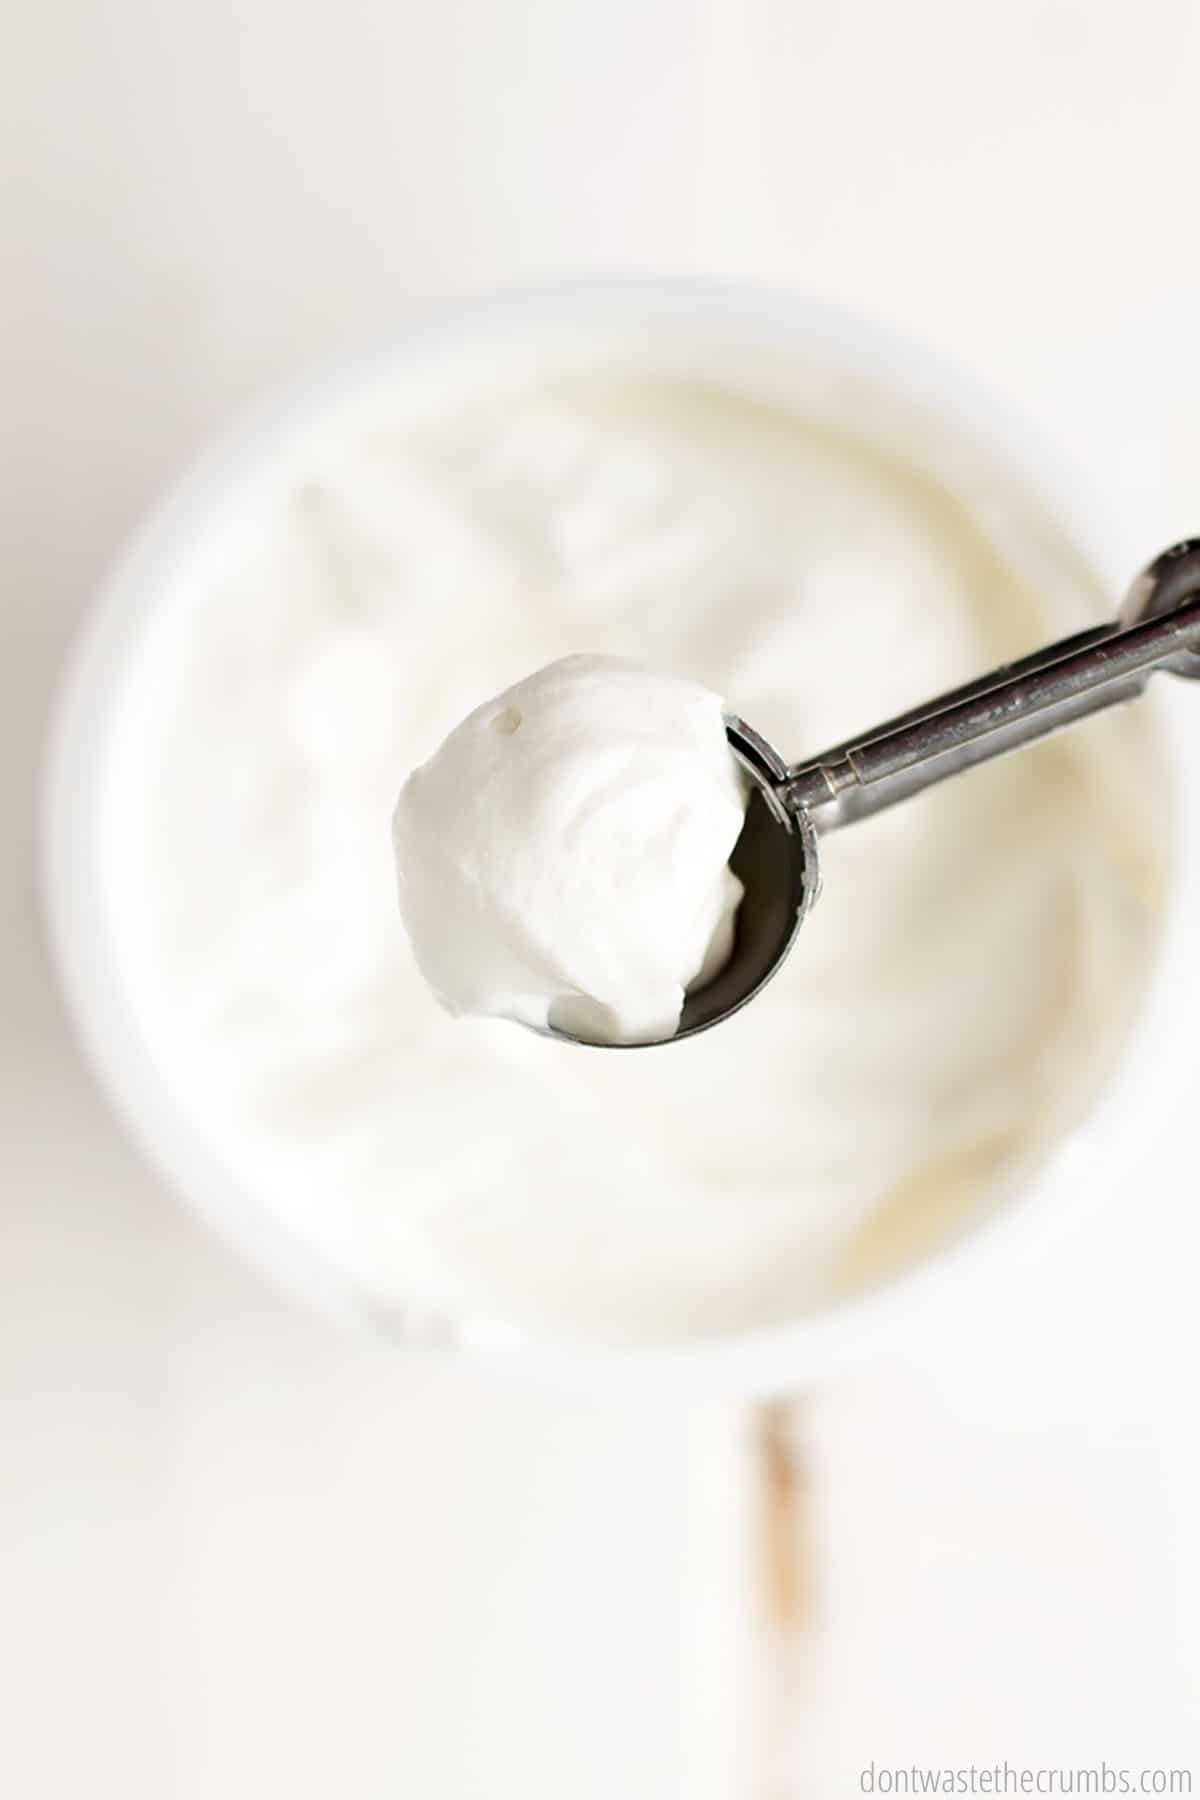 A scoop of yogurt is scooped out of a bowl.